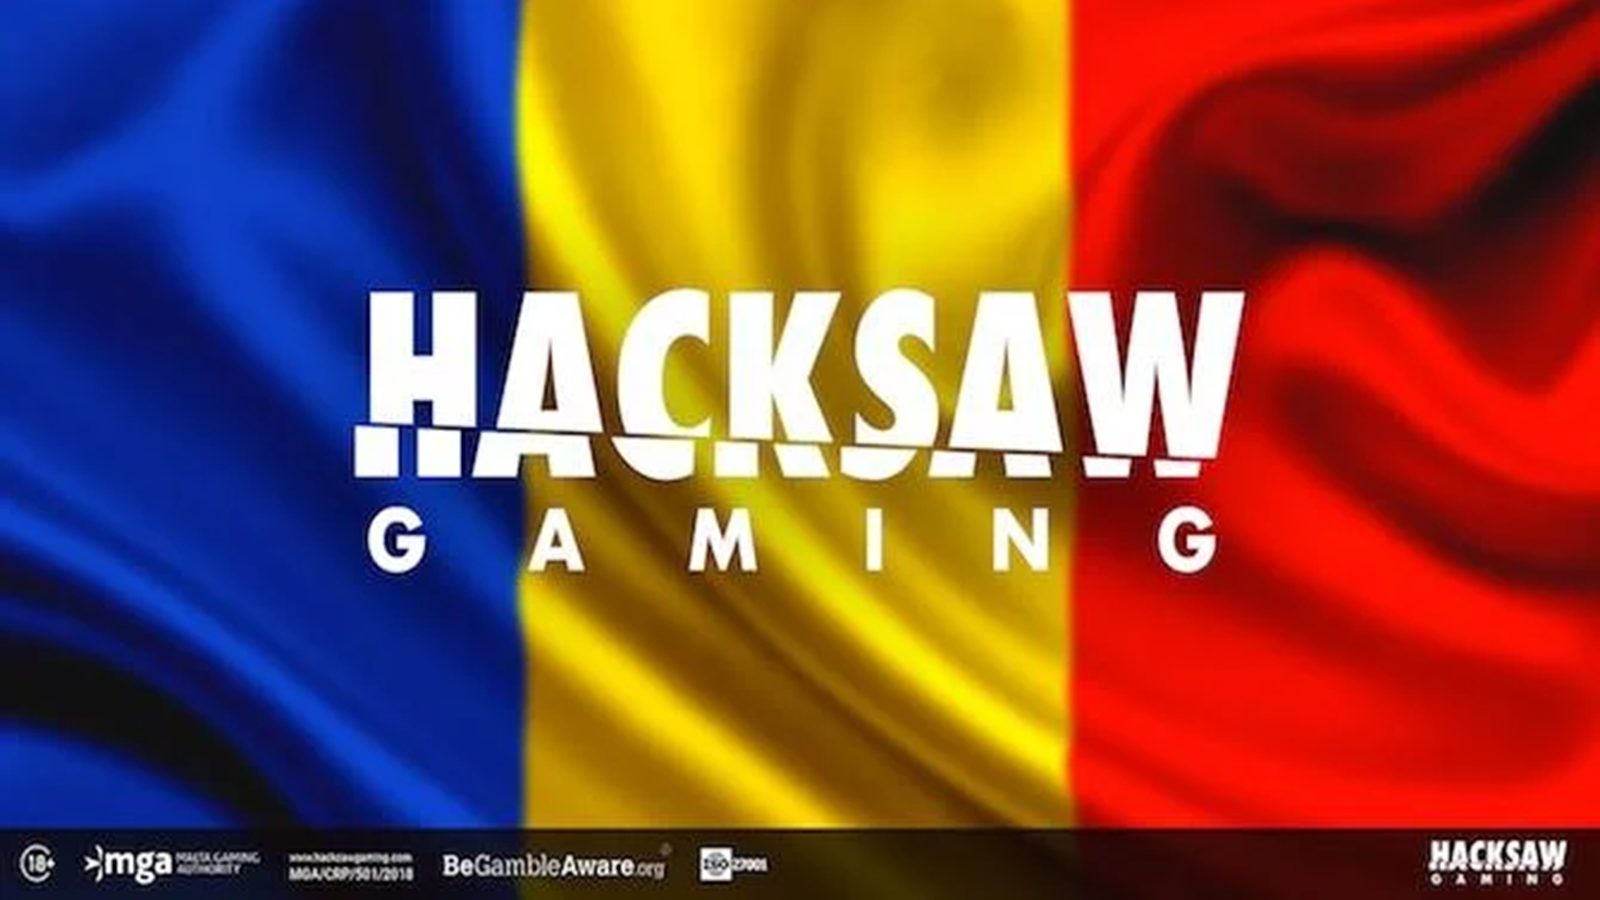 Soft2Bet Expands with Hacksaw Gaming